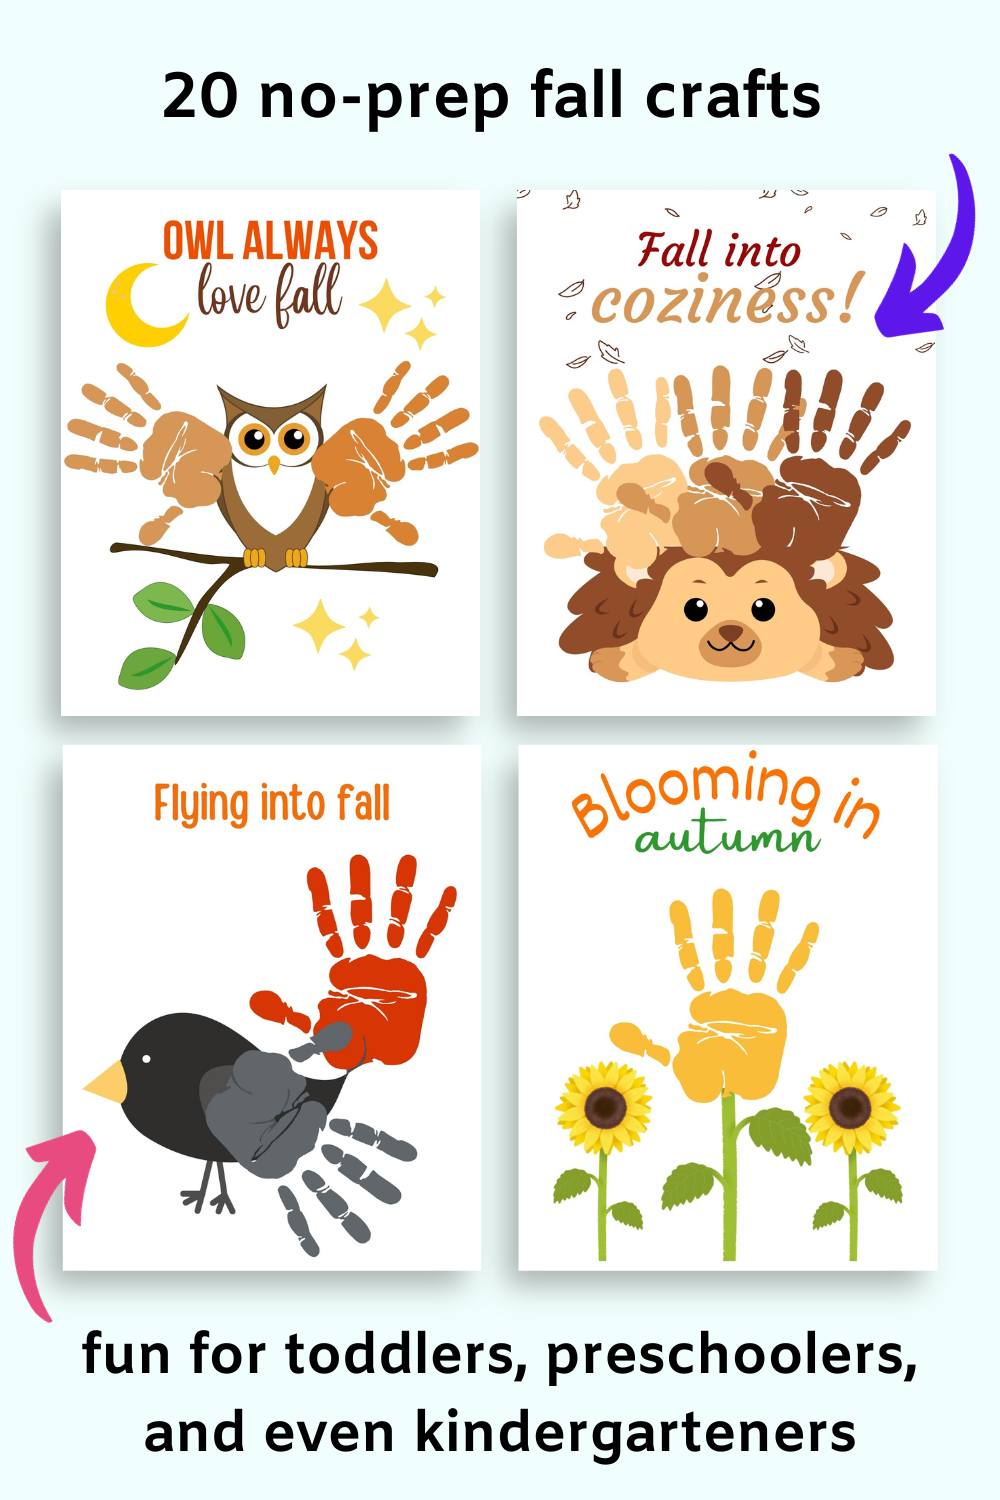 text "20 no-prep fall crafts" and "fun for toddlers, preschoolers, and even kindergarteners" with a preview of four handprint craft pages